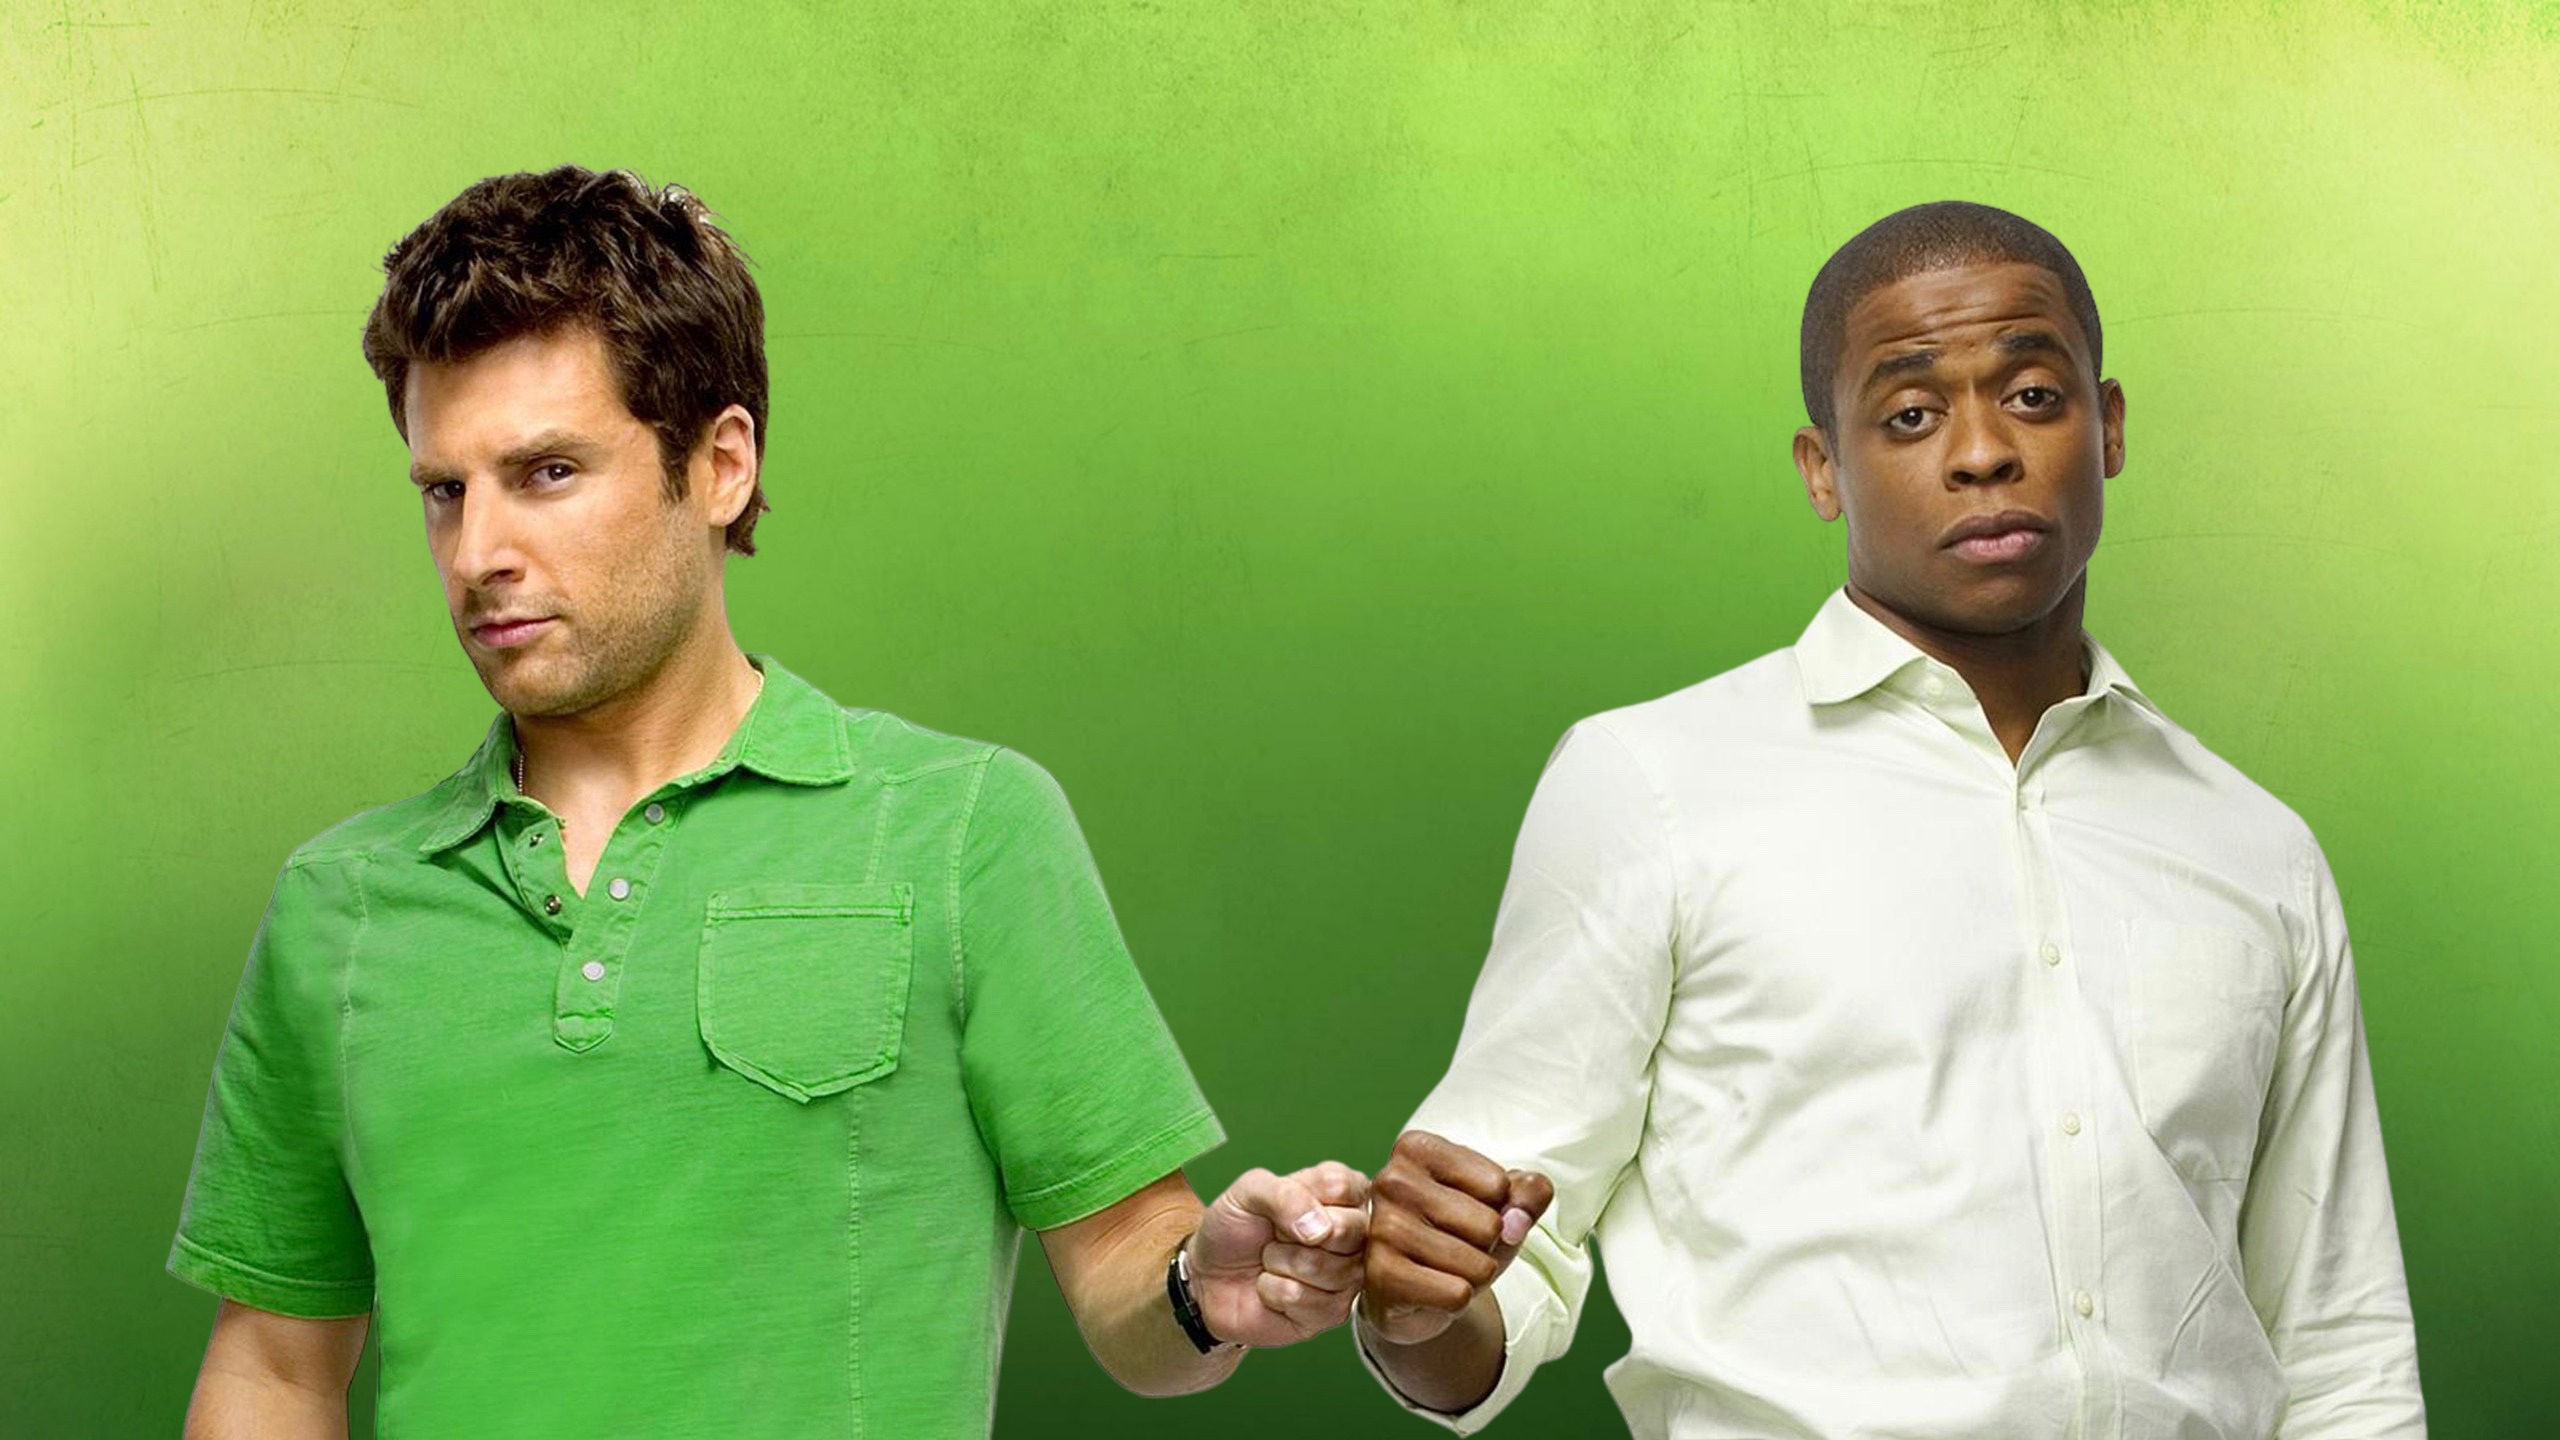 tv show, dulé hill, gus (psych), james roday rodriguez, shawn spencer, psych